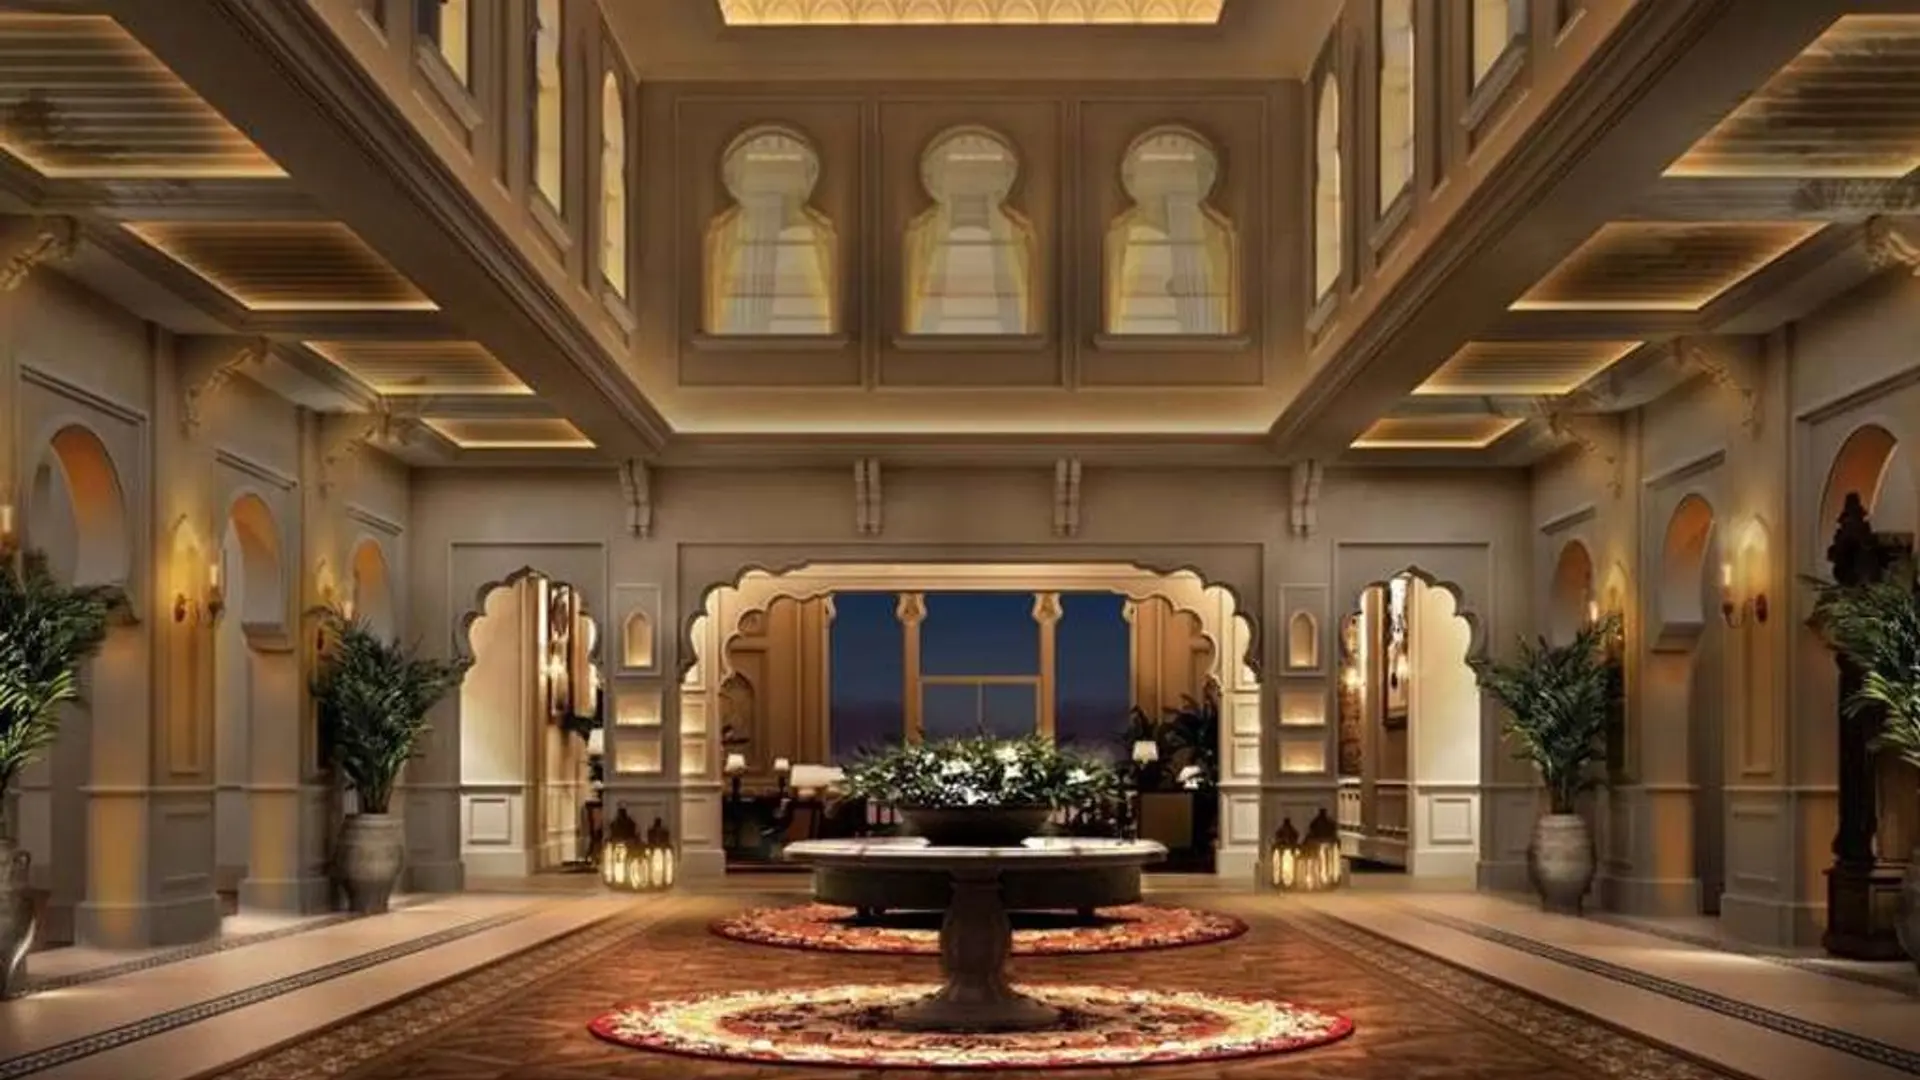 Hotels News - GHM to open a Chedi resort in Qatar